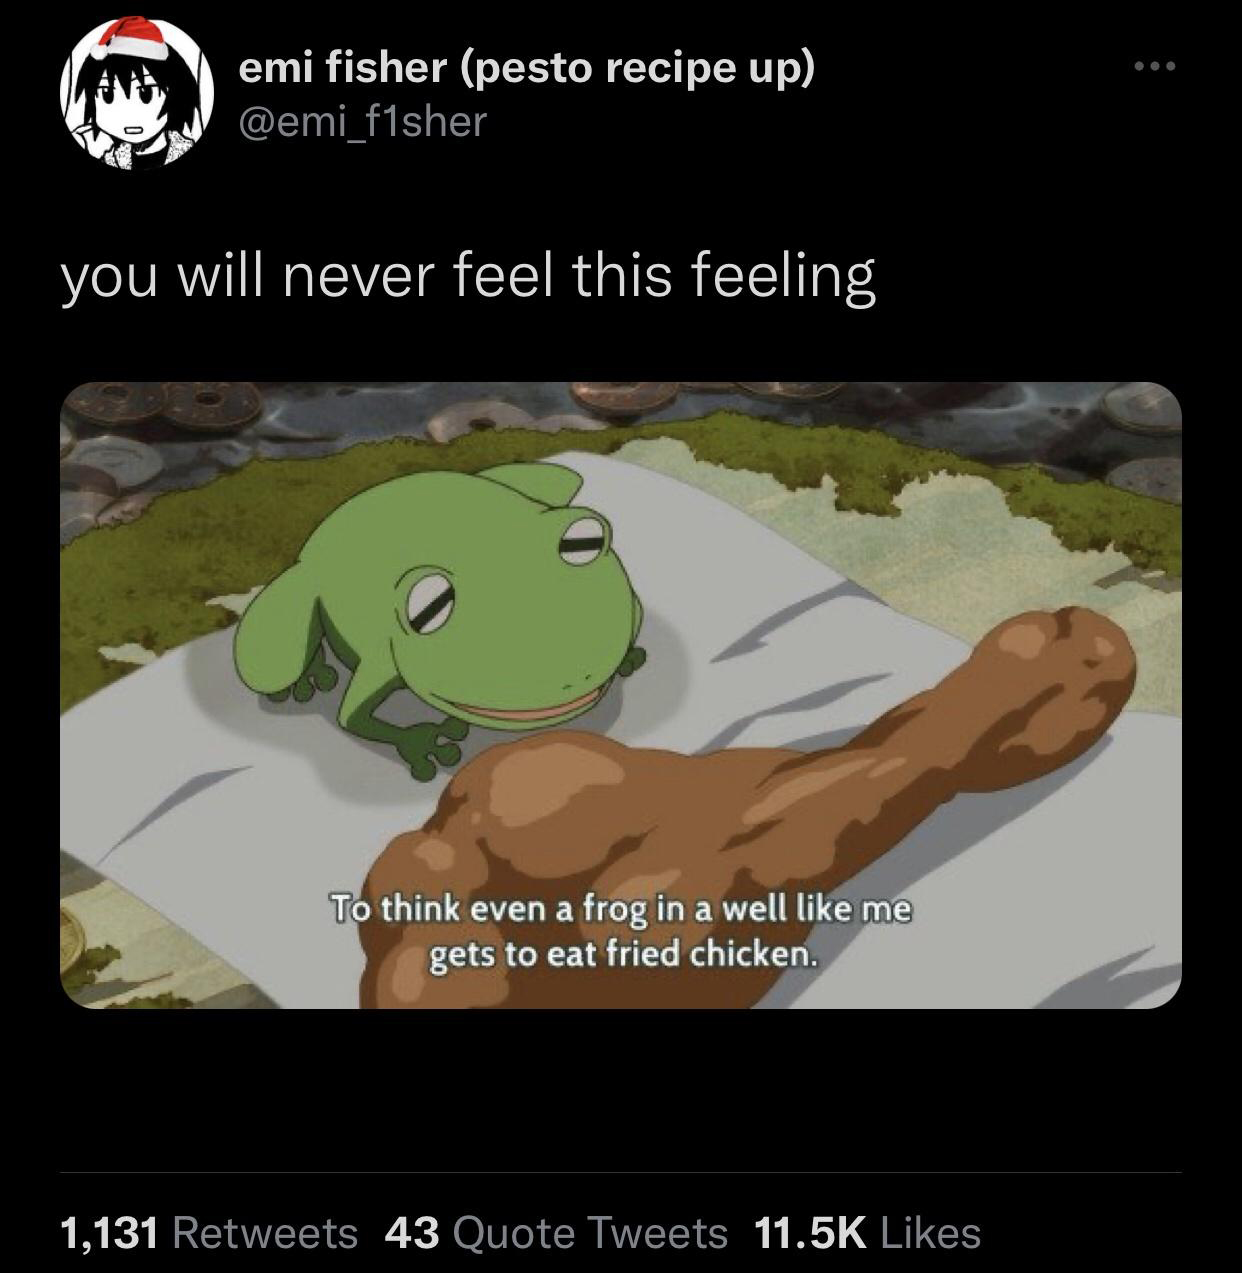 funny memes - think even a frog in a well like me gets to eat fried chicken - @ @ @ emi fisher pesto recipe up f1sher you will never feel this feeling To think even a frog in a well me gets to eat fried chicken. 1,131 43 Quote Tweets